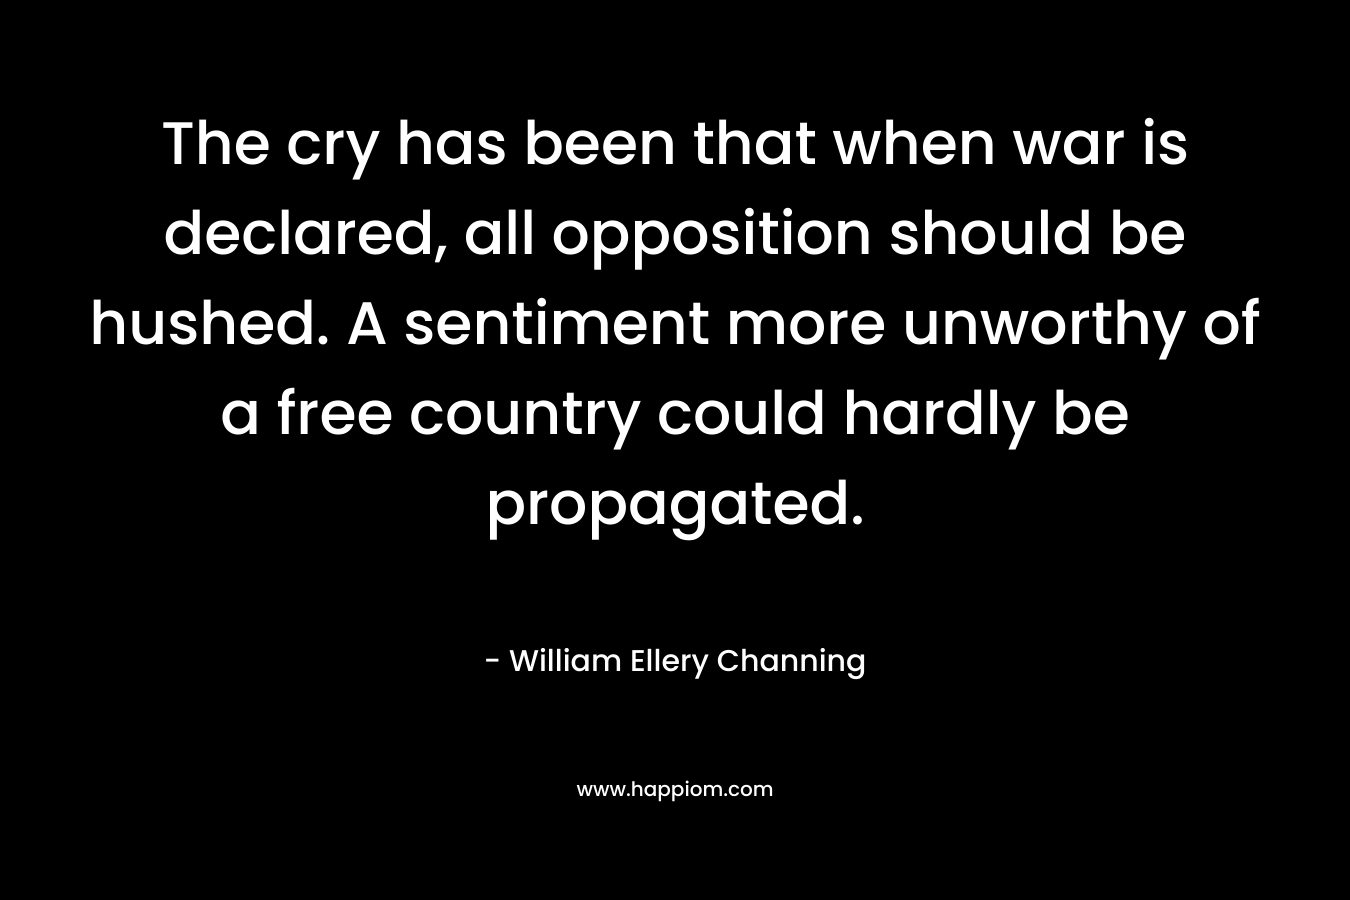 The cry has been that when war is declared, all opposition should be hushed. A sentiment more unworthy of a free country could hardly be propagated. – William Ellery Channing